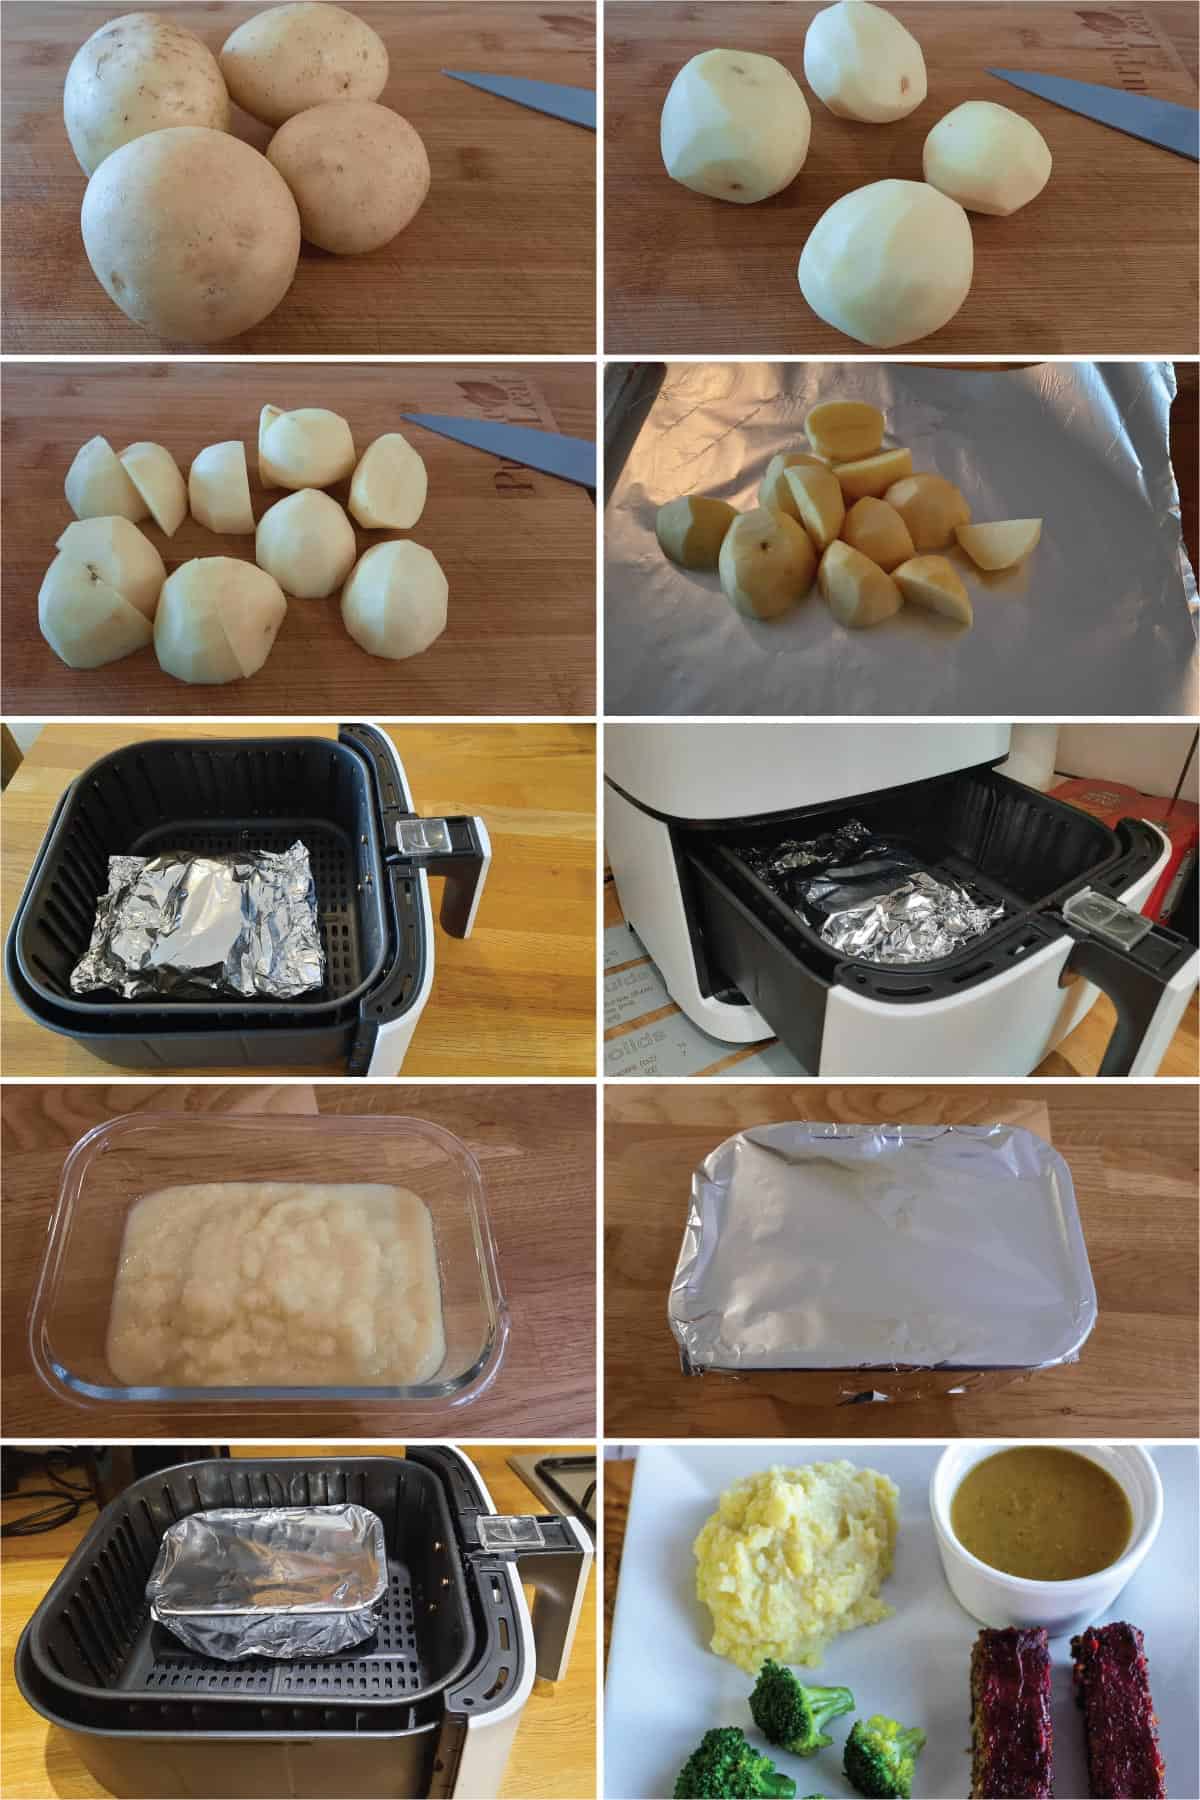 The process of making Air Fryer Mashed Potatoes.